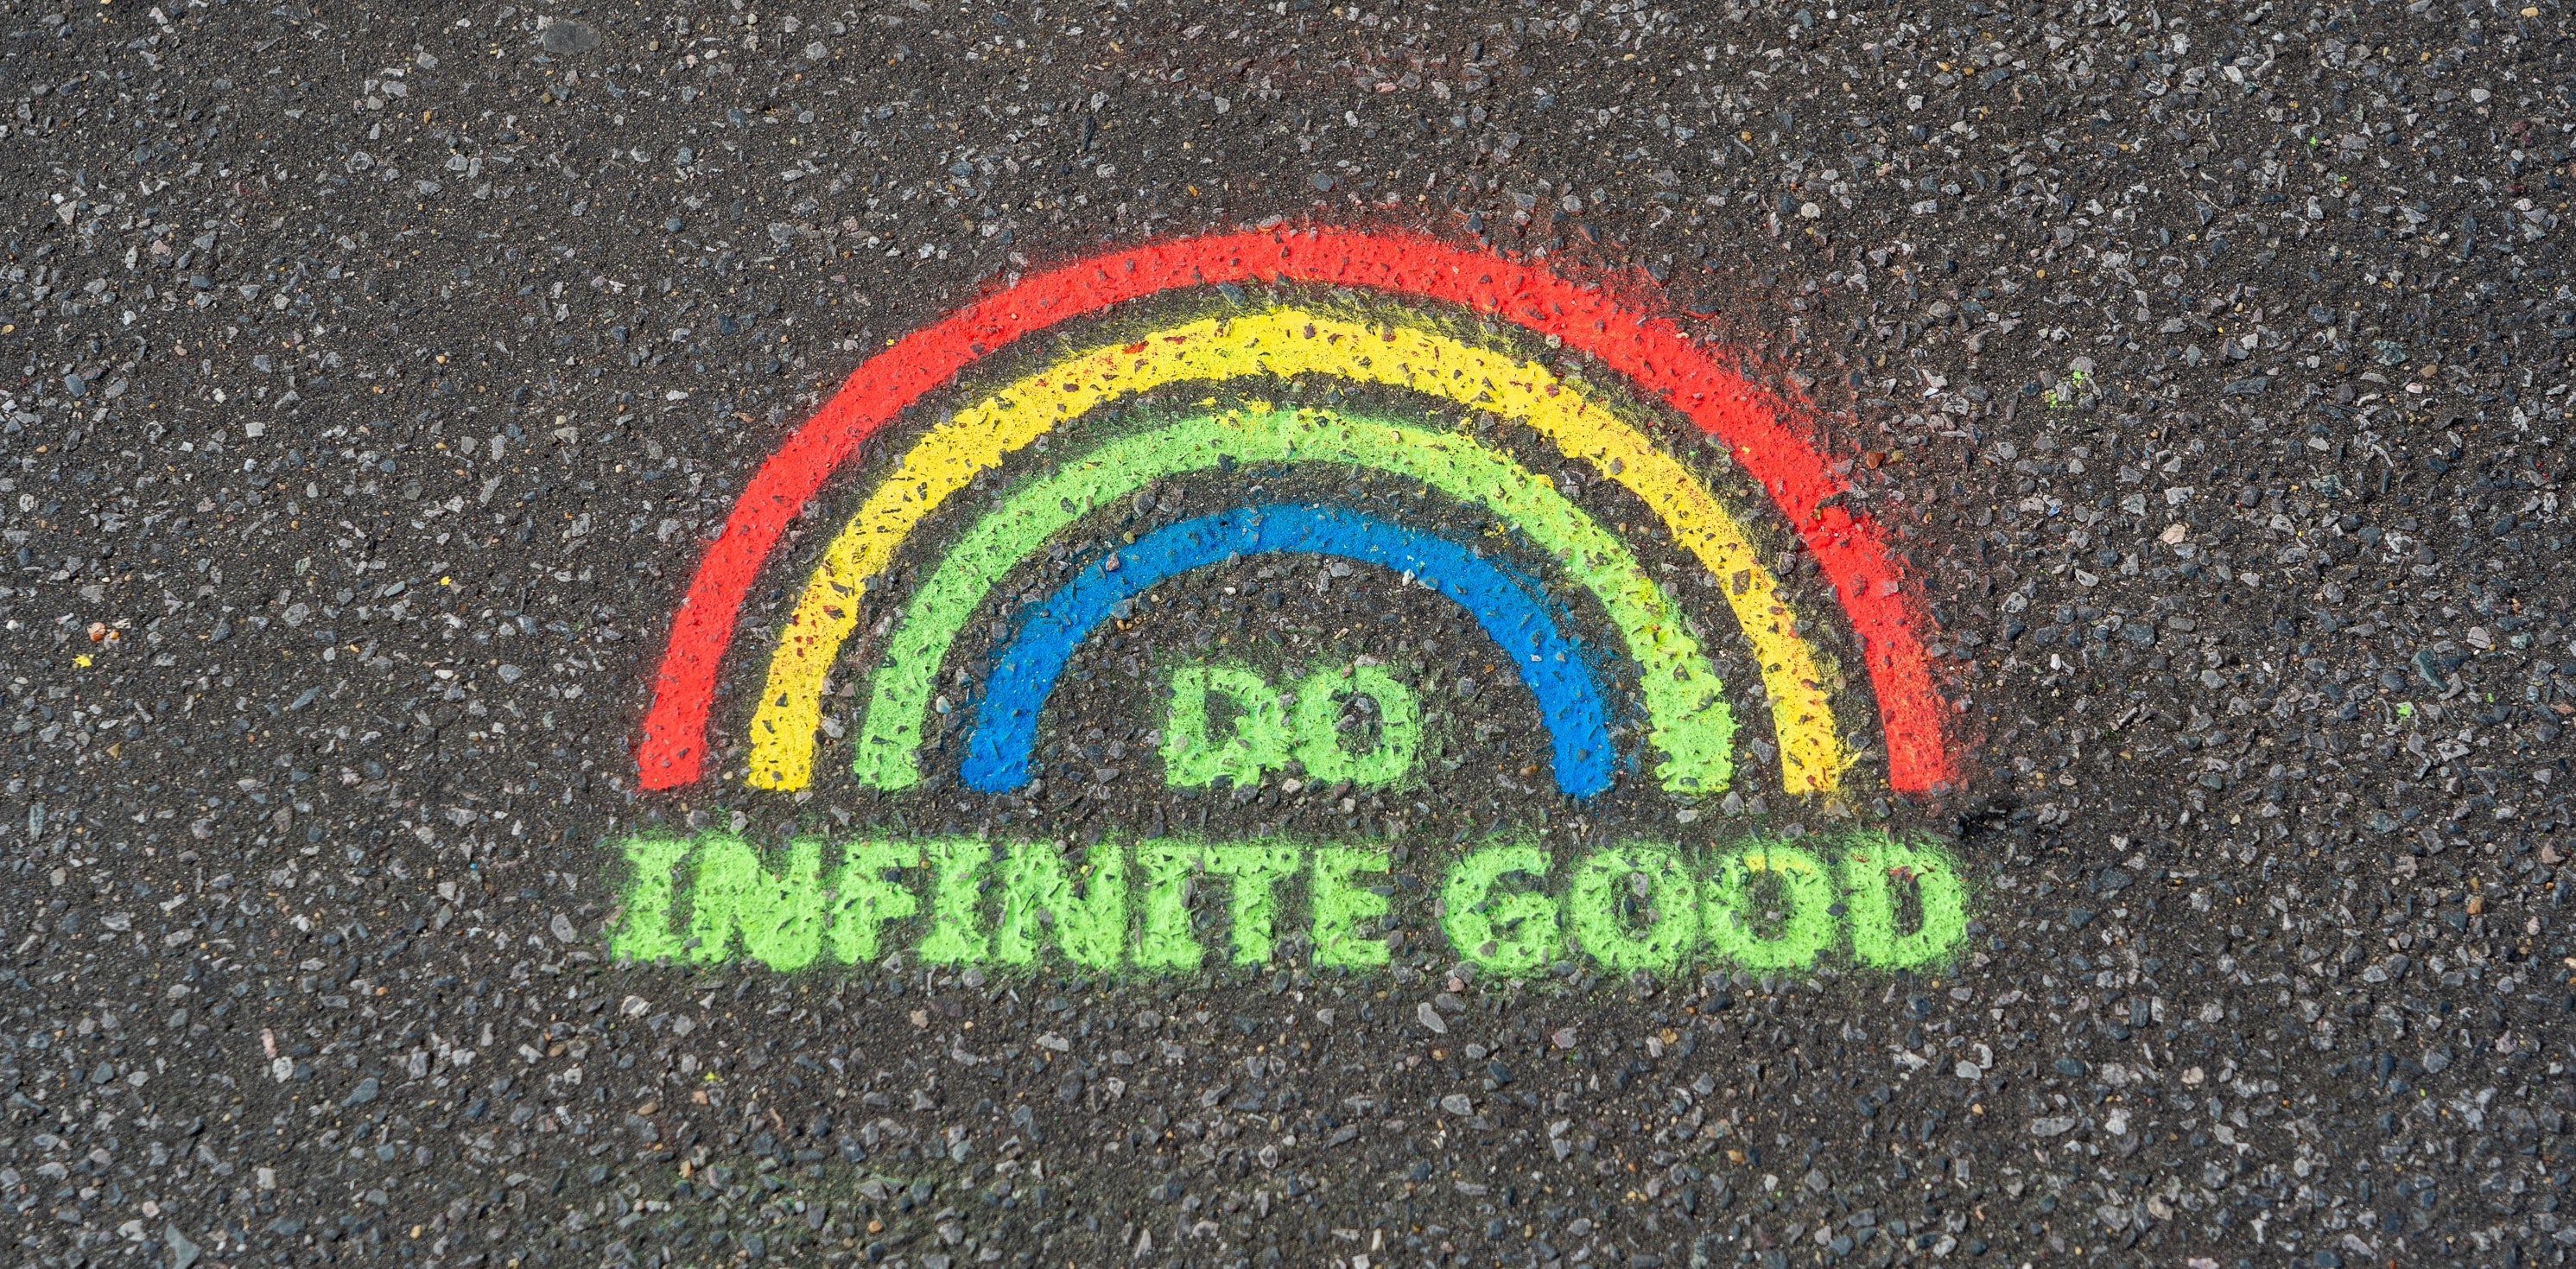 a stencil graffiti of a rainbow with the words “do infinite good" in all caps written underneath, spraypainted onto tarmac